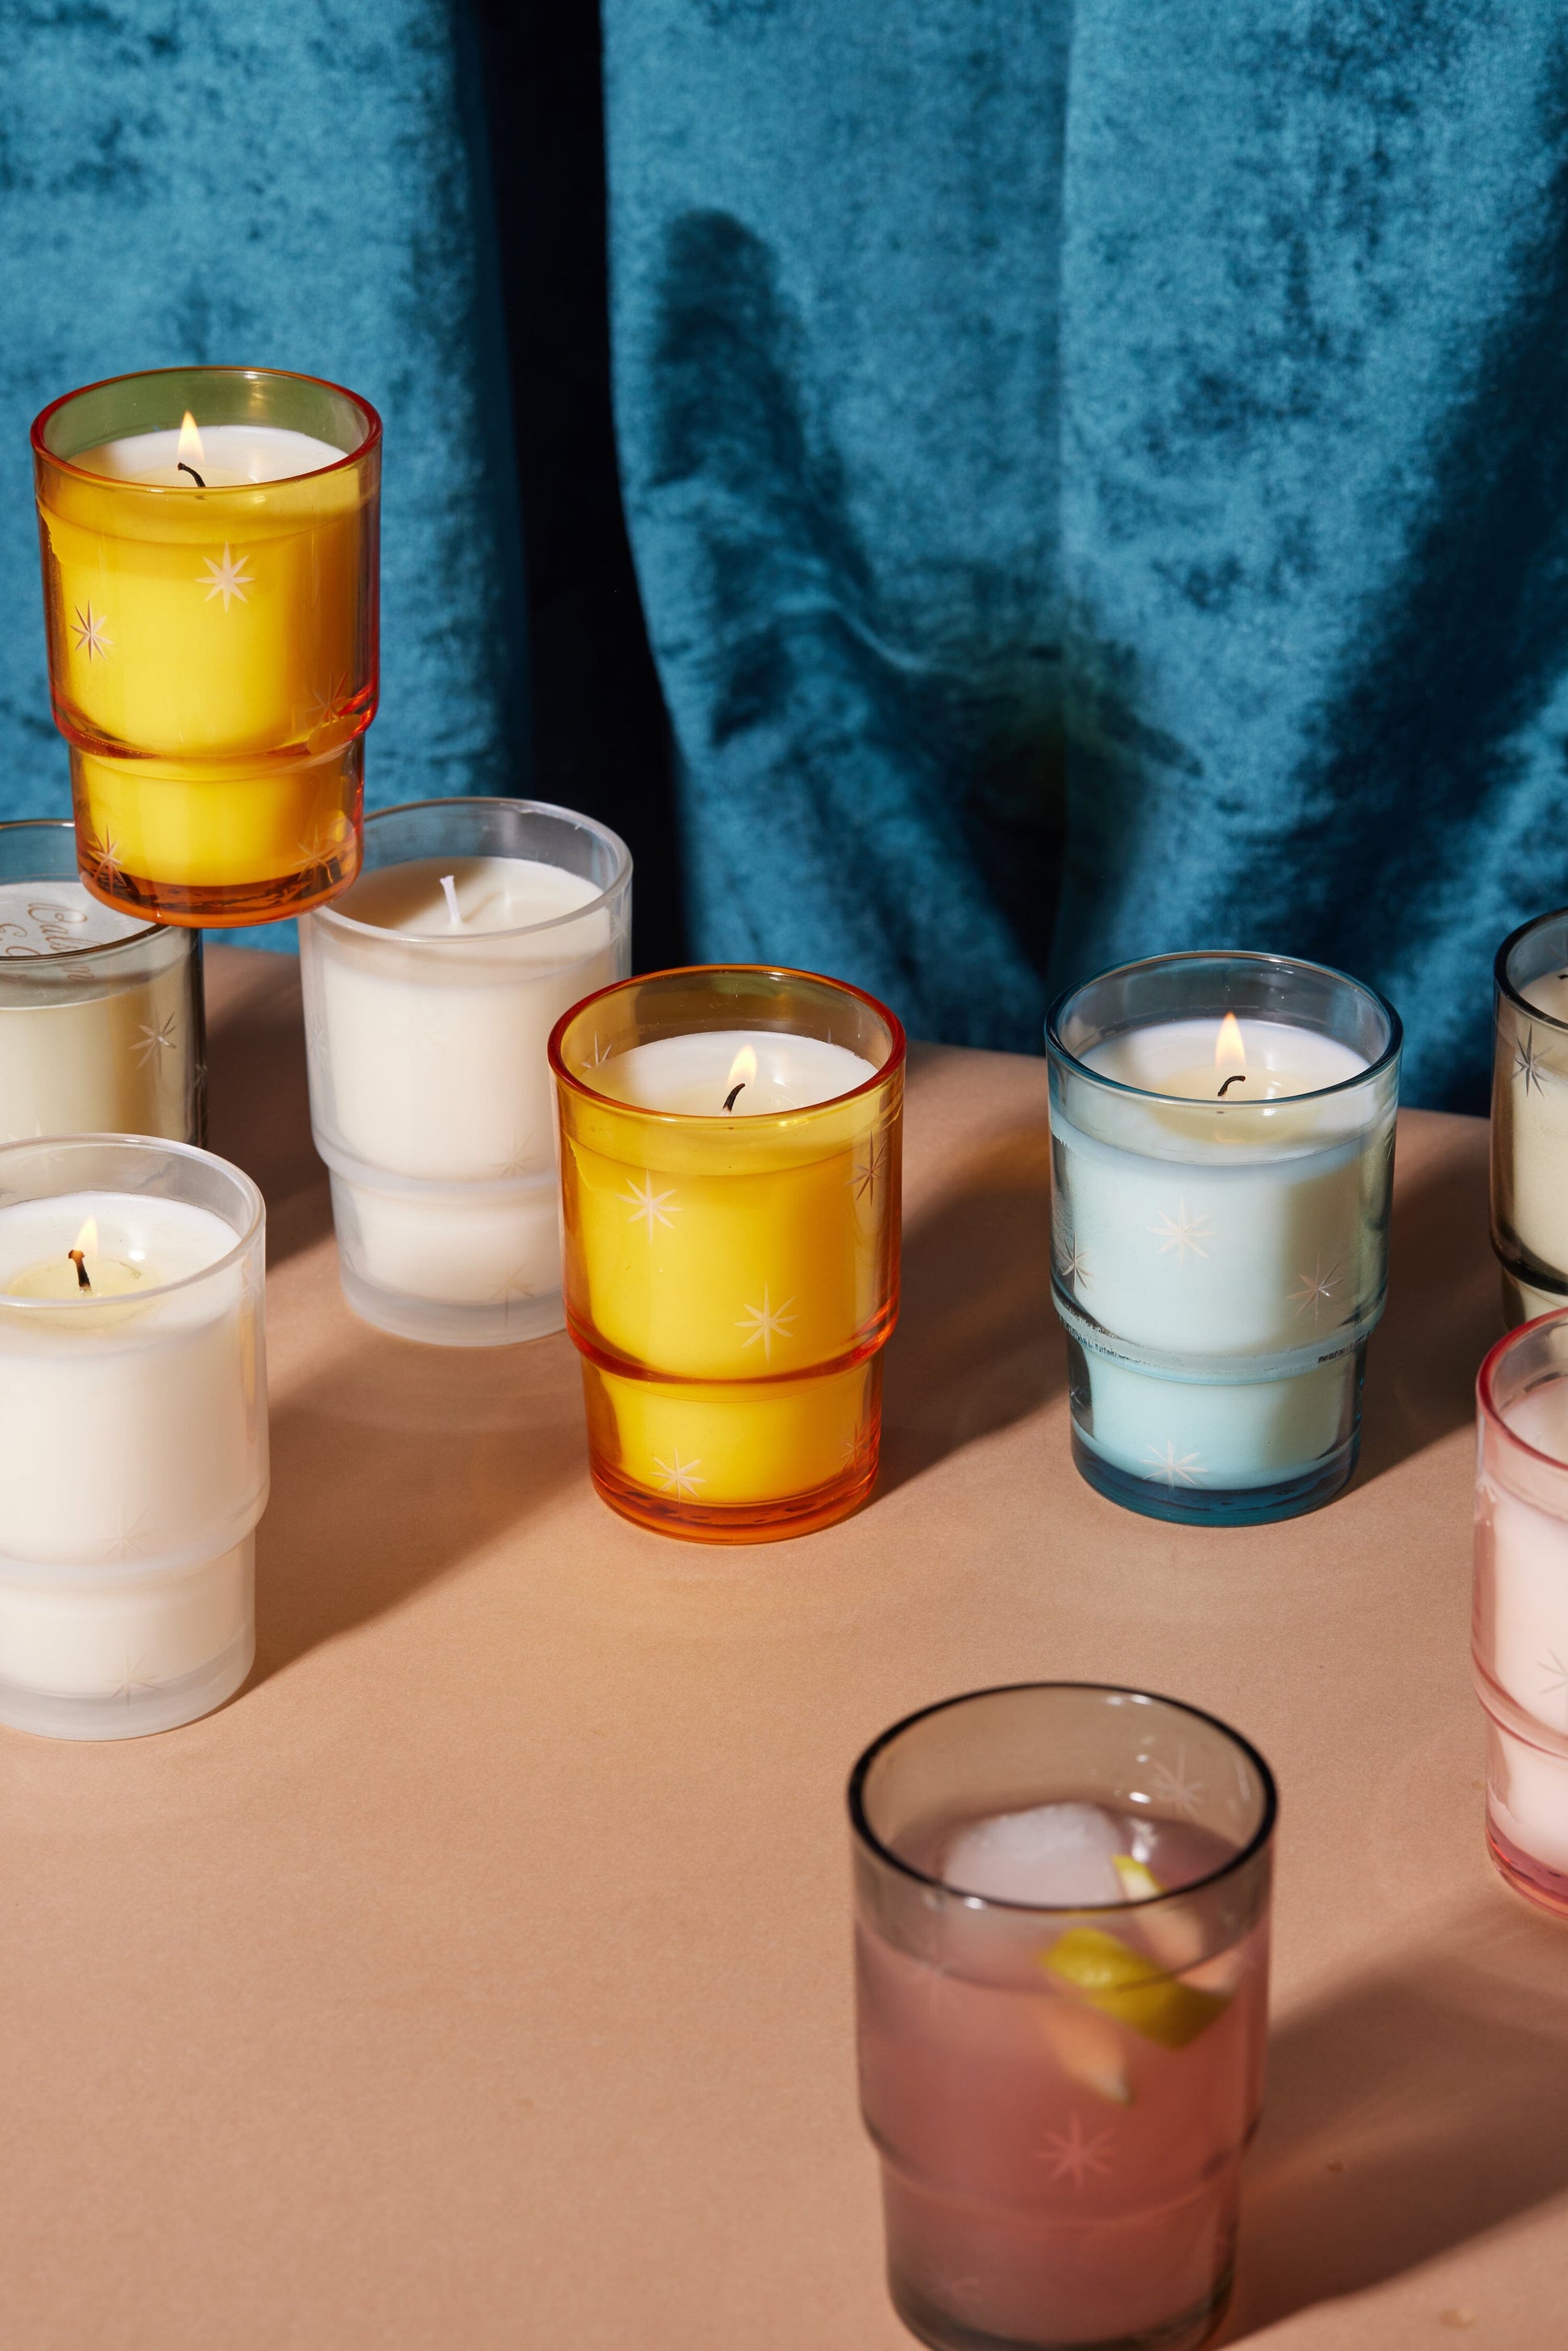 9 candles showing in the image.  6 different varieties of candles in the collection. 